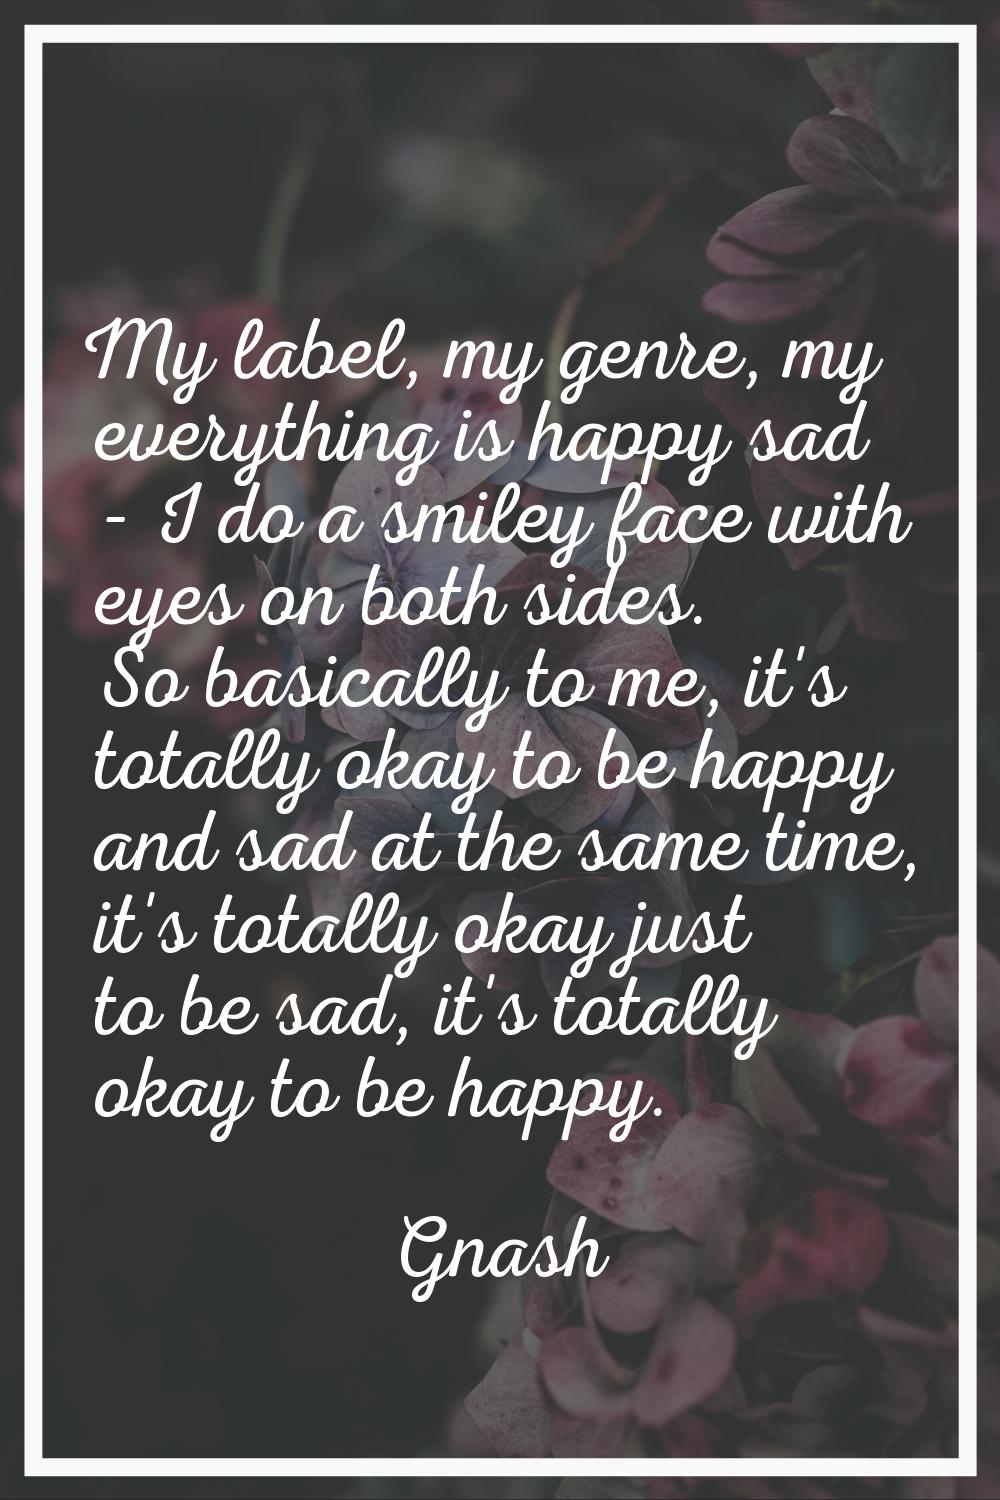 My label, my genre, my everything is happy sad - I do a smiley face with eyes on both sides. So bas